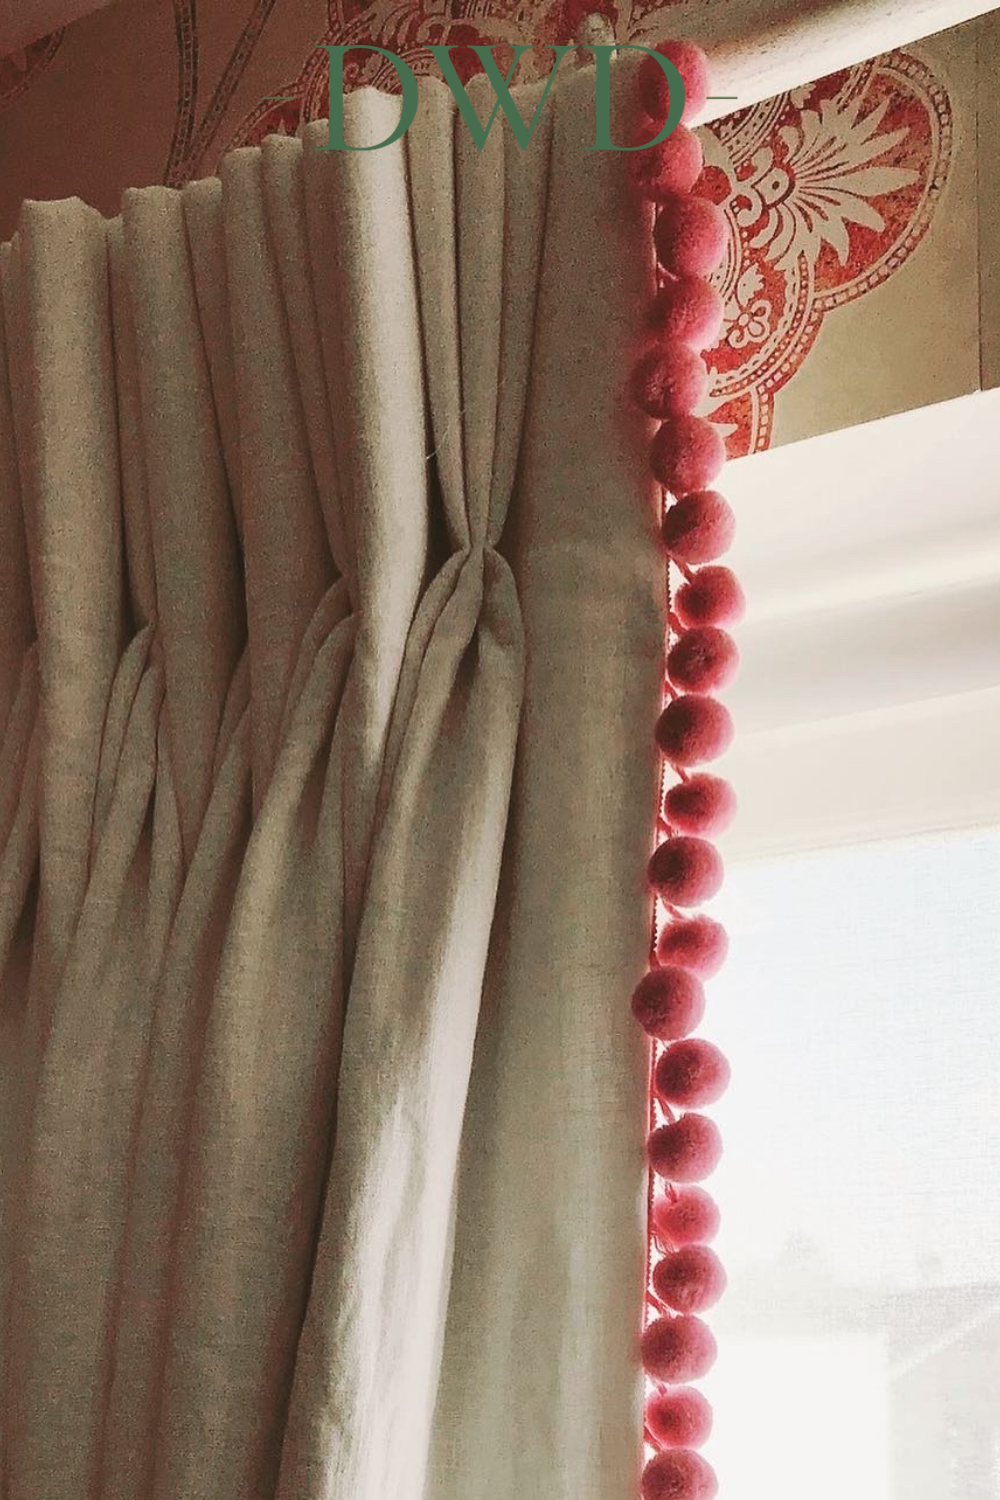 Pretty in Pink: Pink Curtains to Add a Soft Touch to Any Room